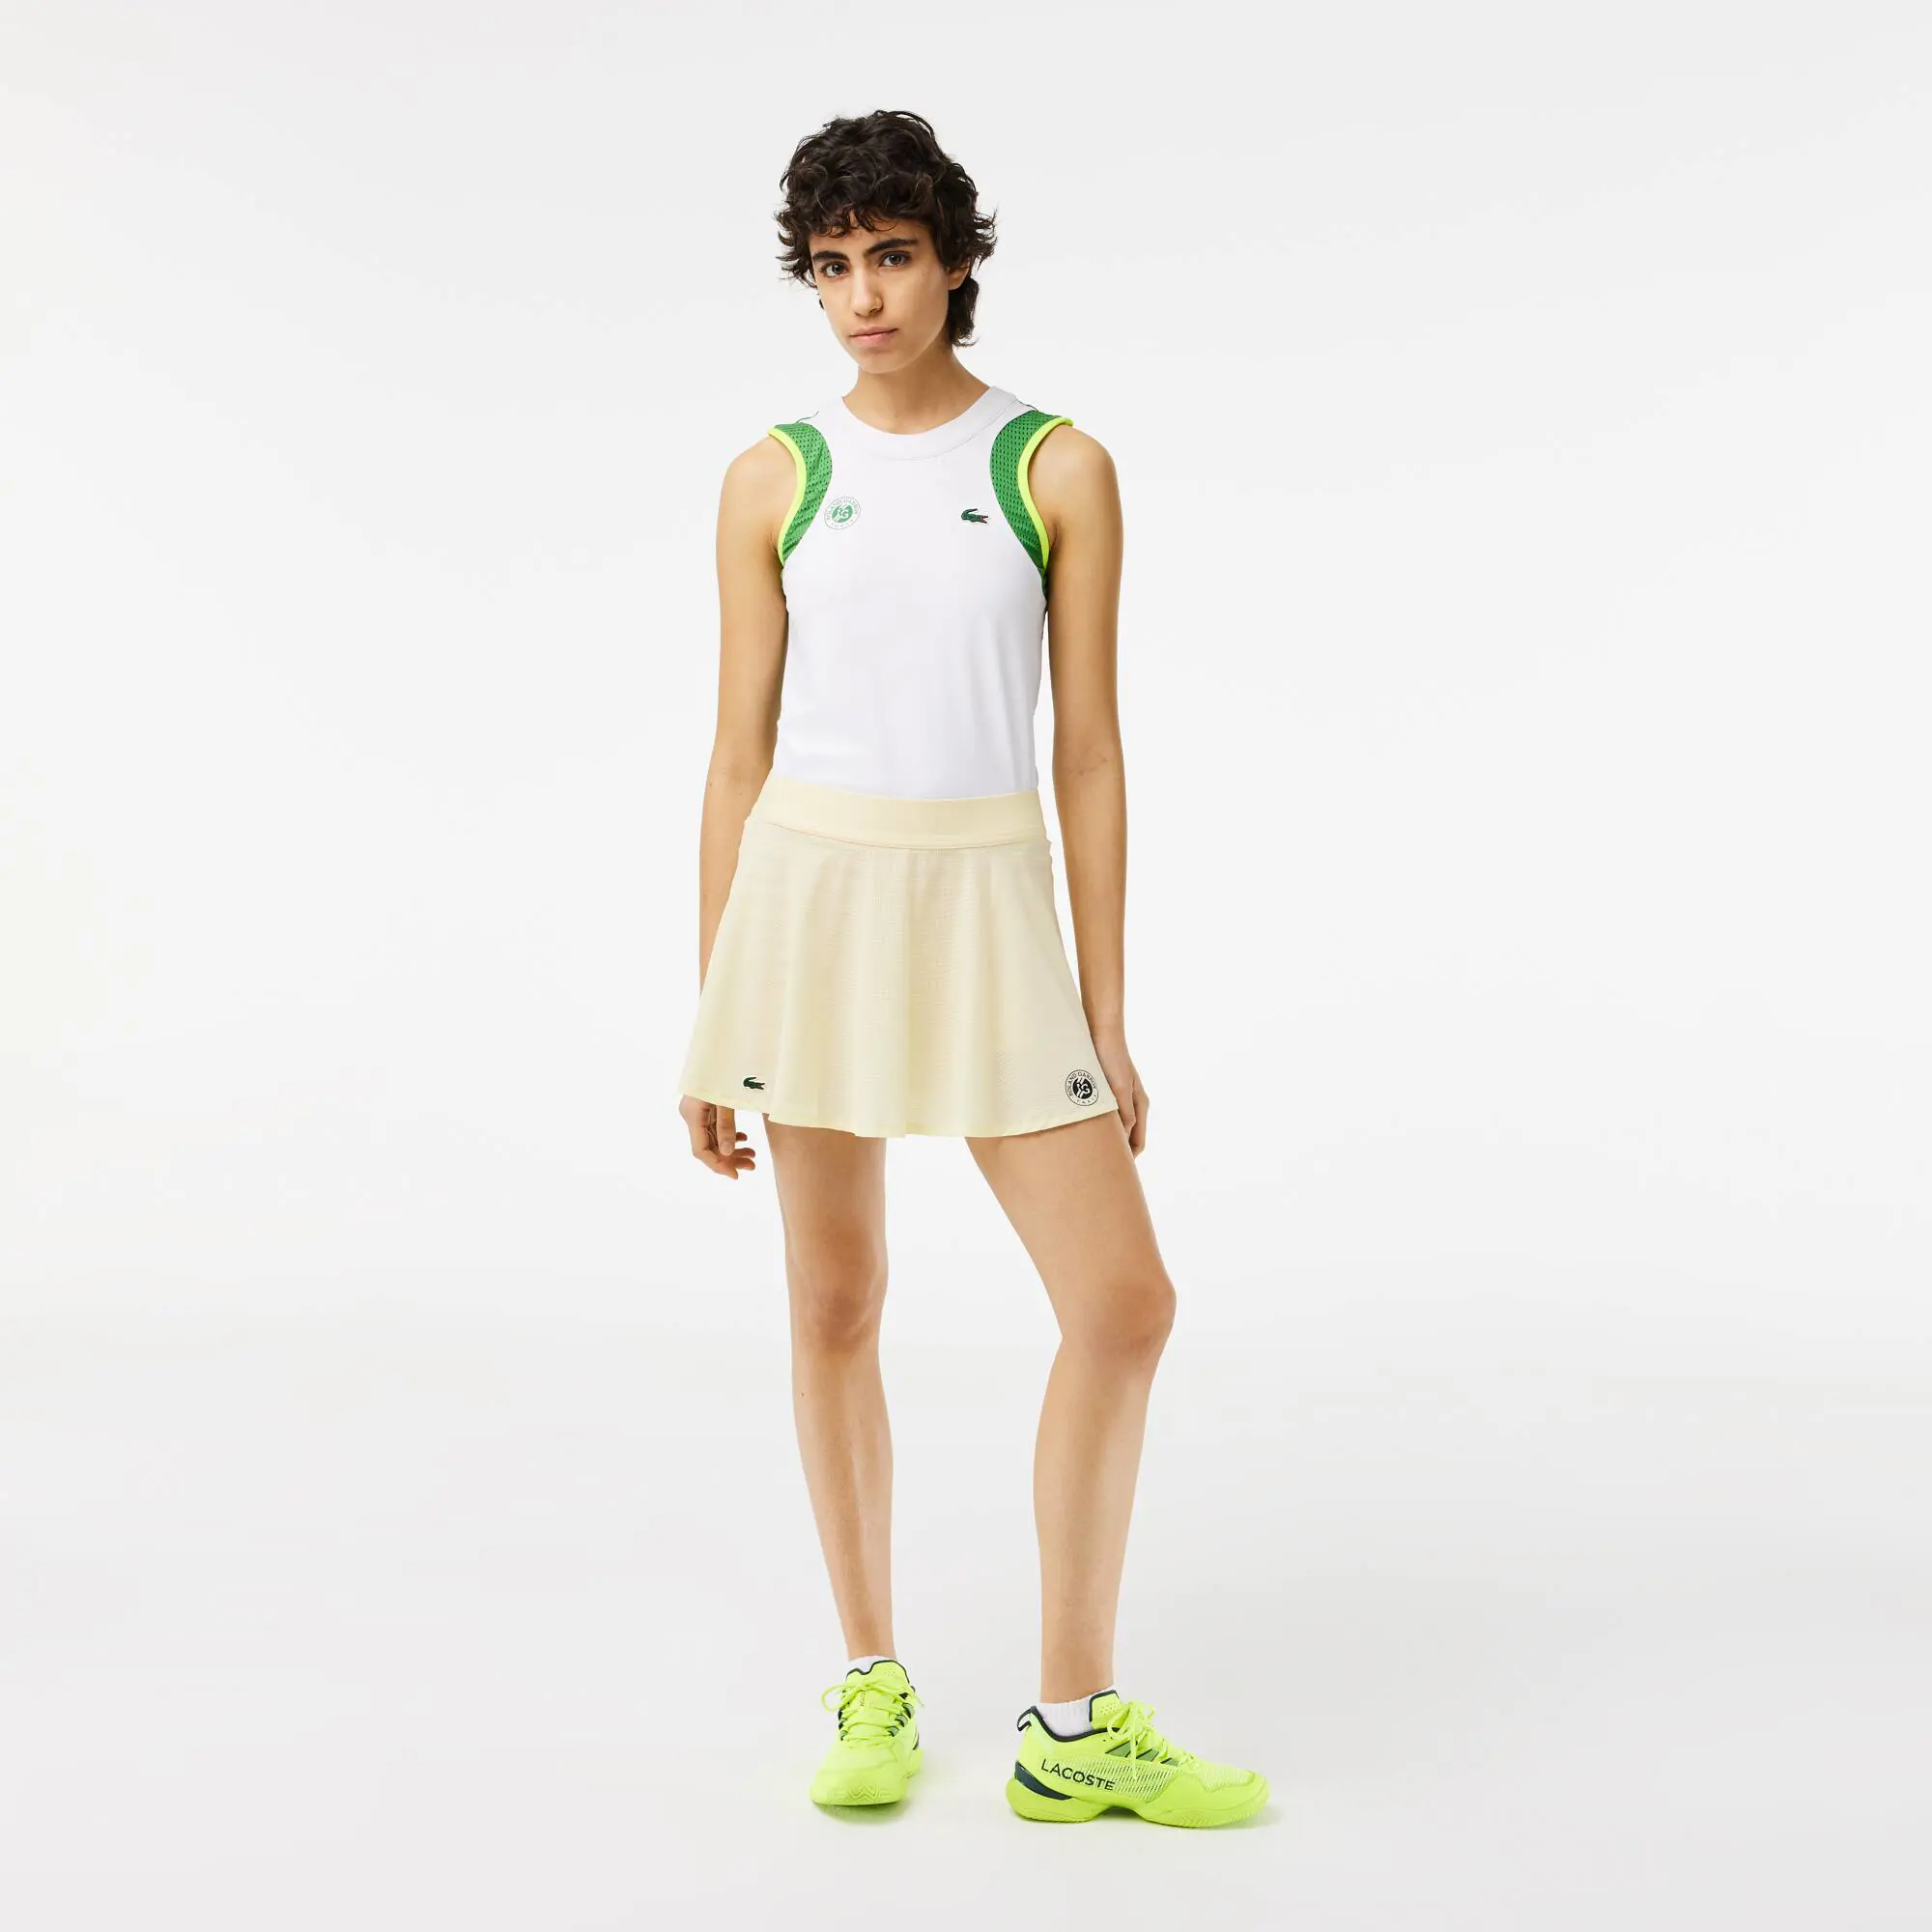 Lacoste Women’s Roland Garros Edition Sport Skirt with Built-in Shorts. 1